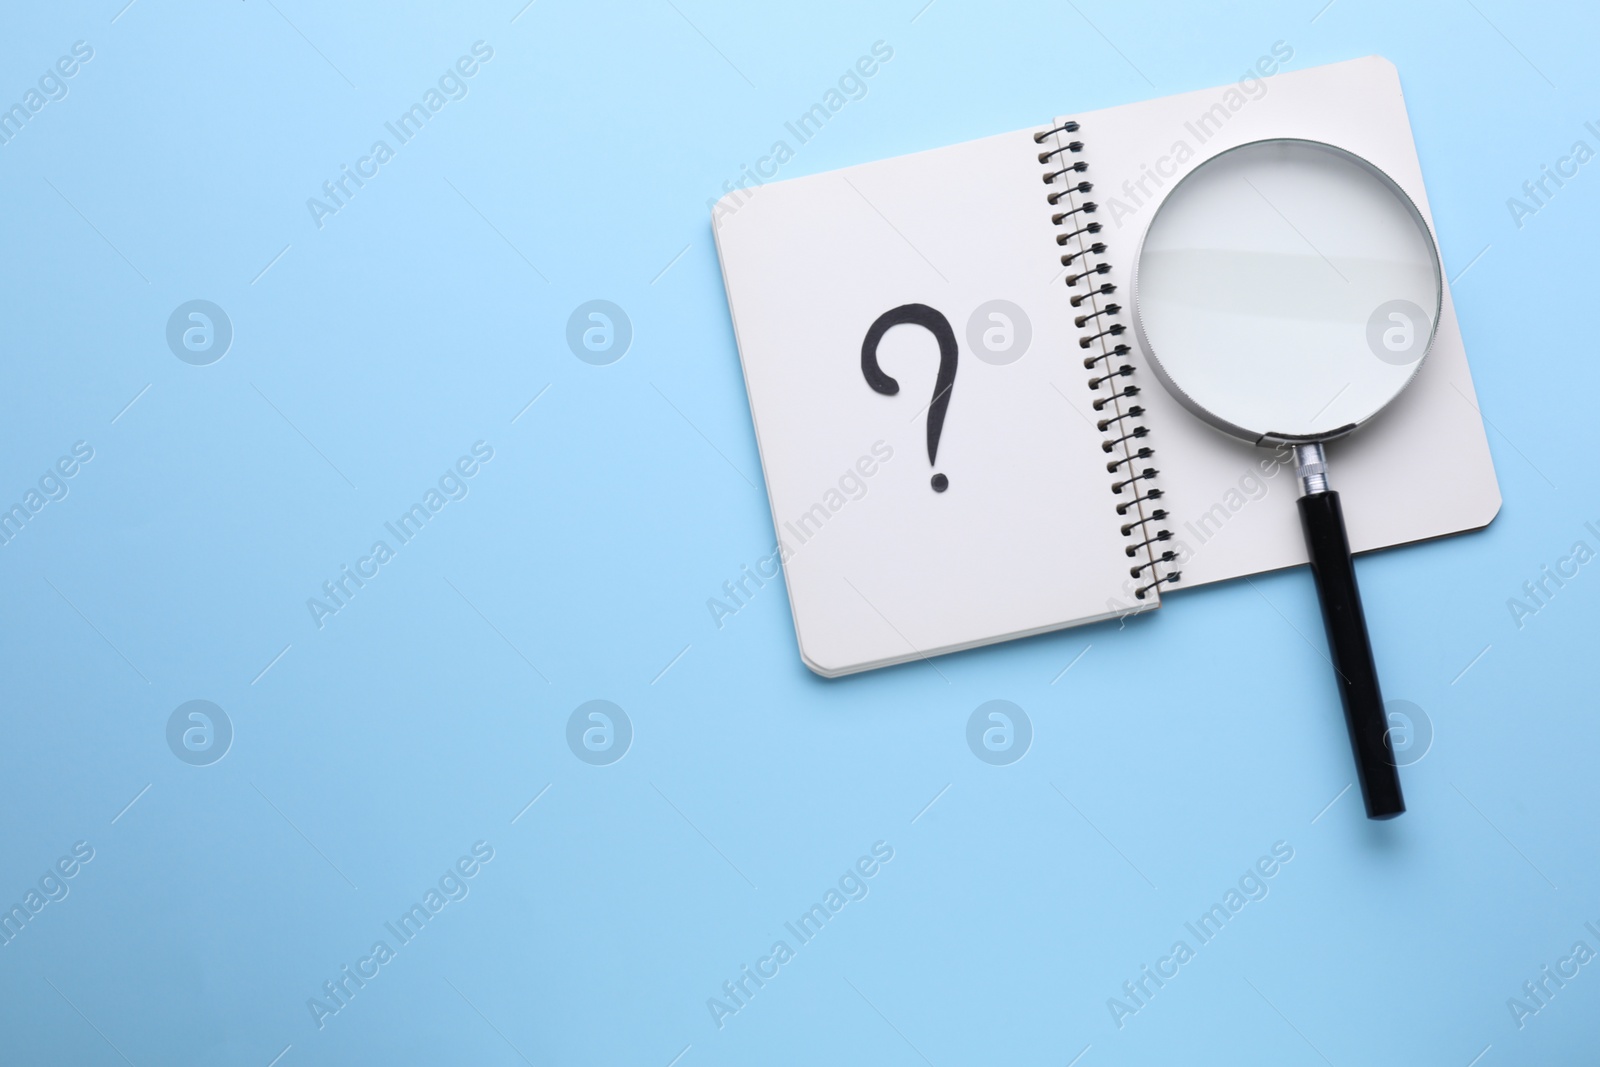 Photo of Magnifying glass and notebook with question mark on light blue background, top view. Space for text